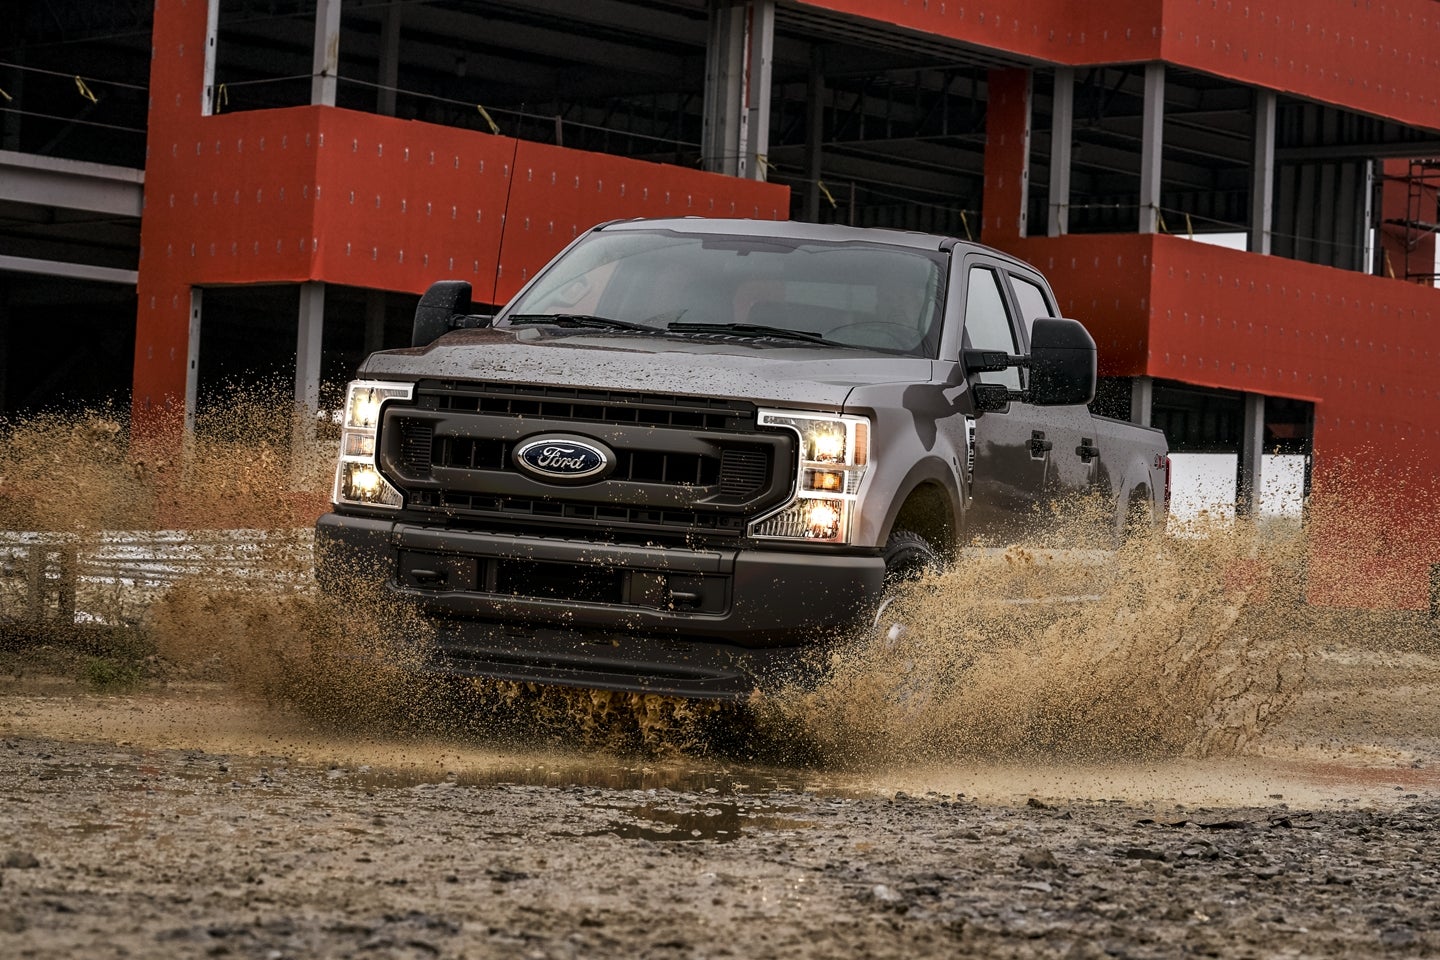 2020 Ford F-250 Super Duty for Sale near Fort Rucker, AL